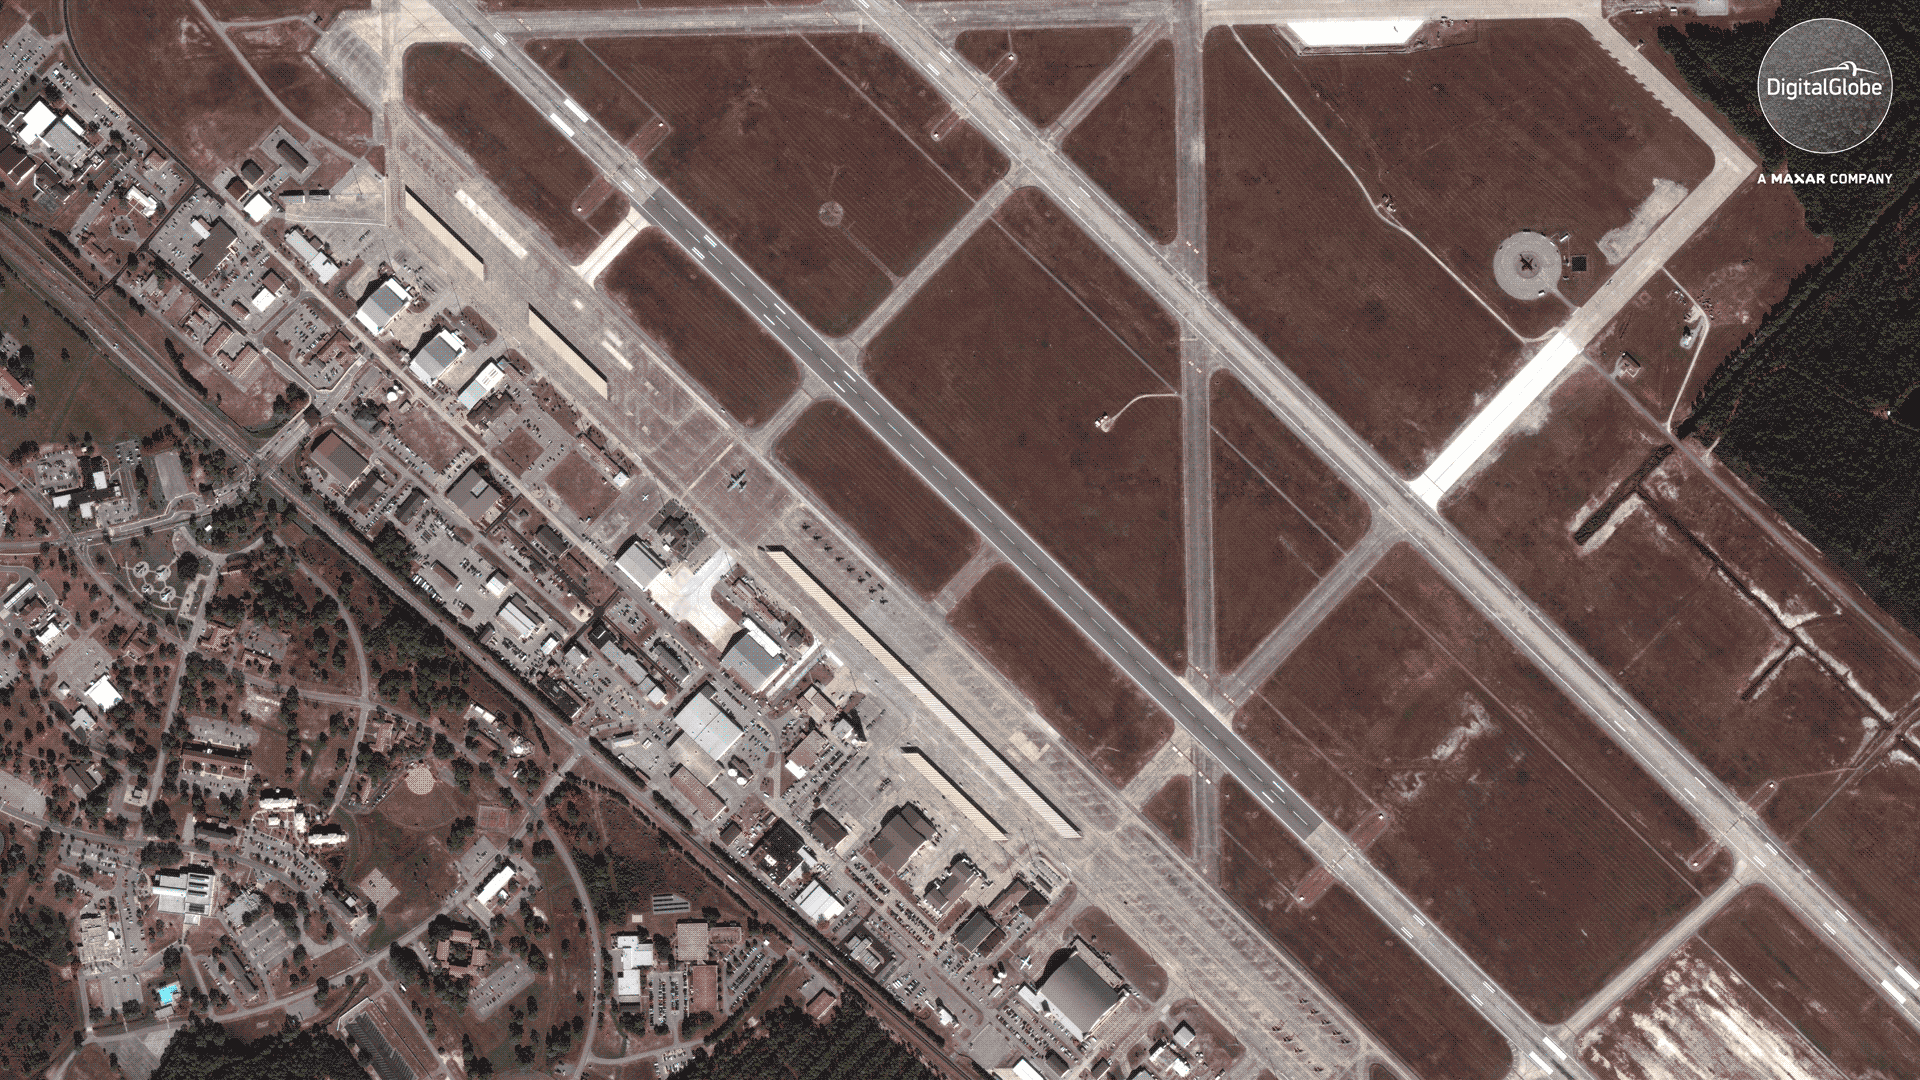 Gif of before and after images of Tyndall Air Force Base